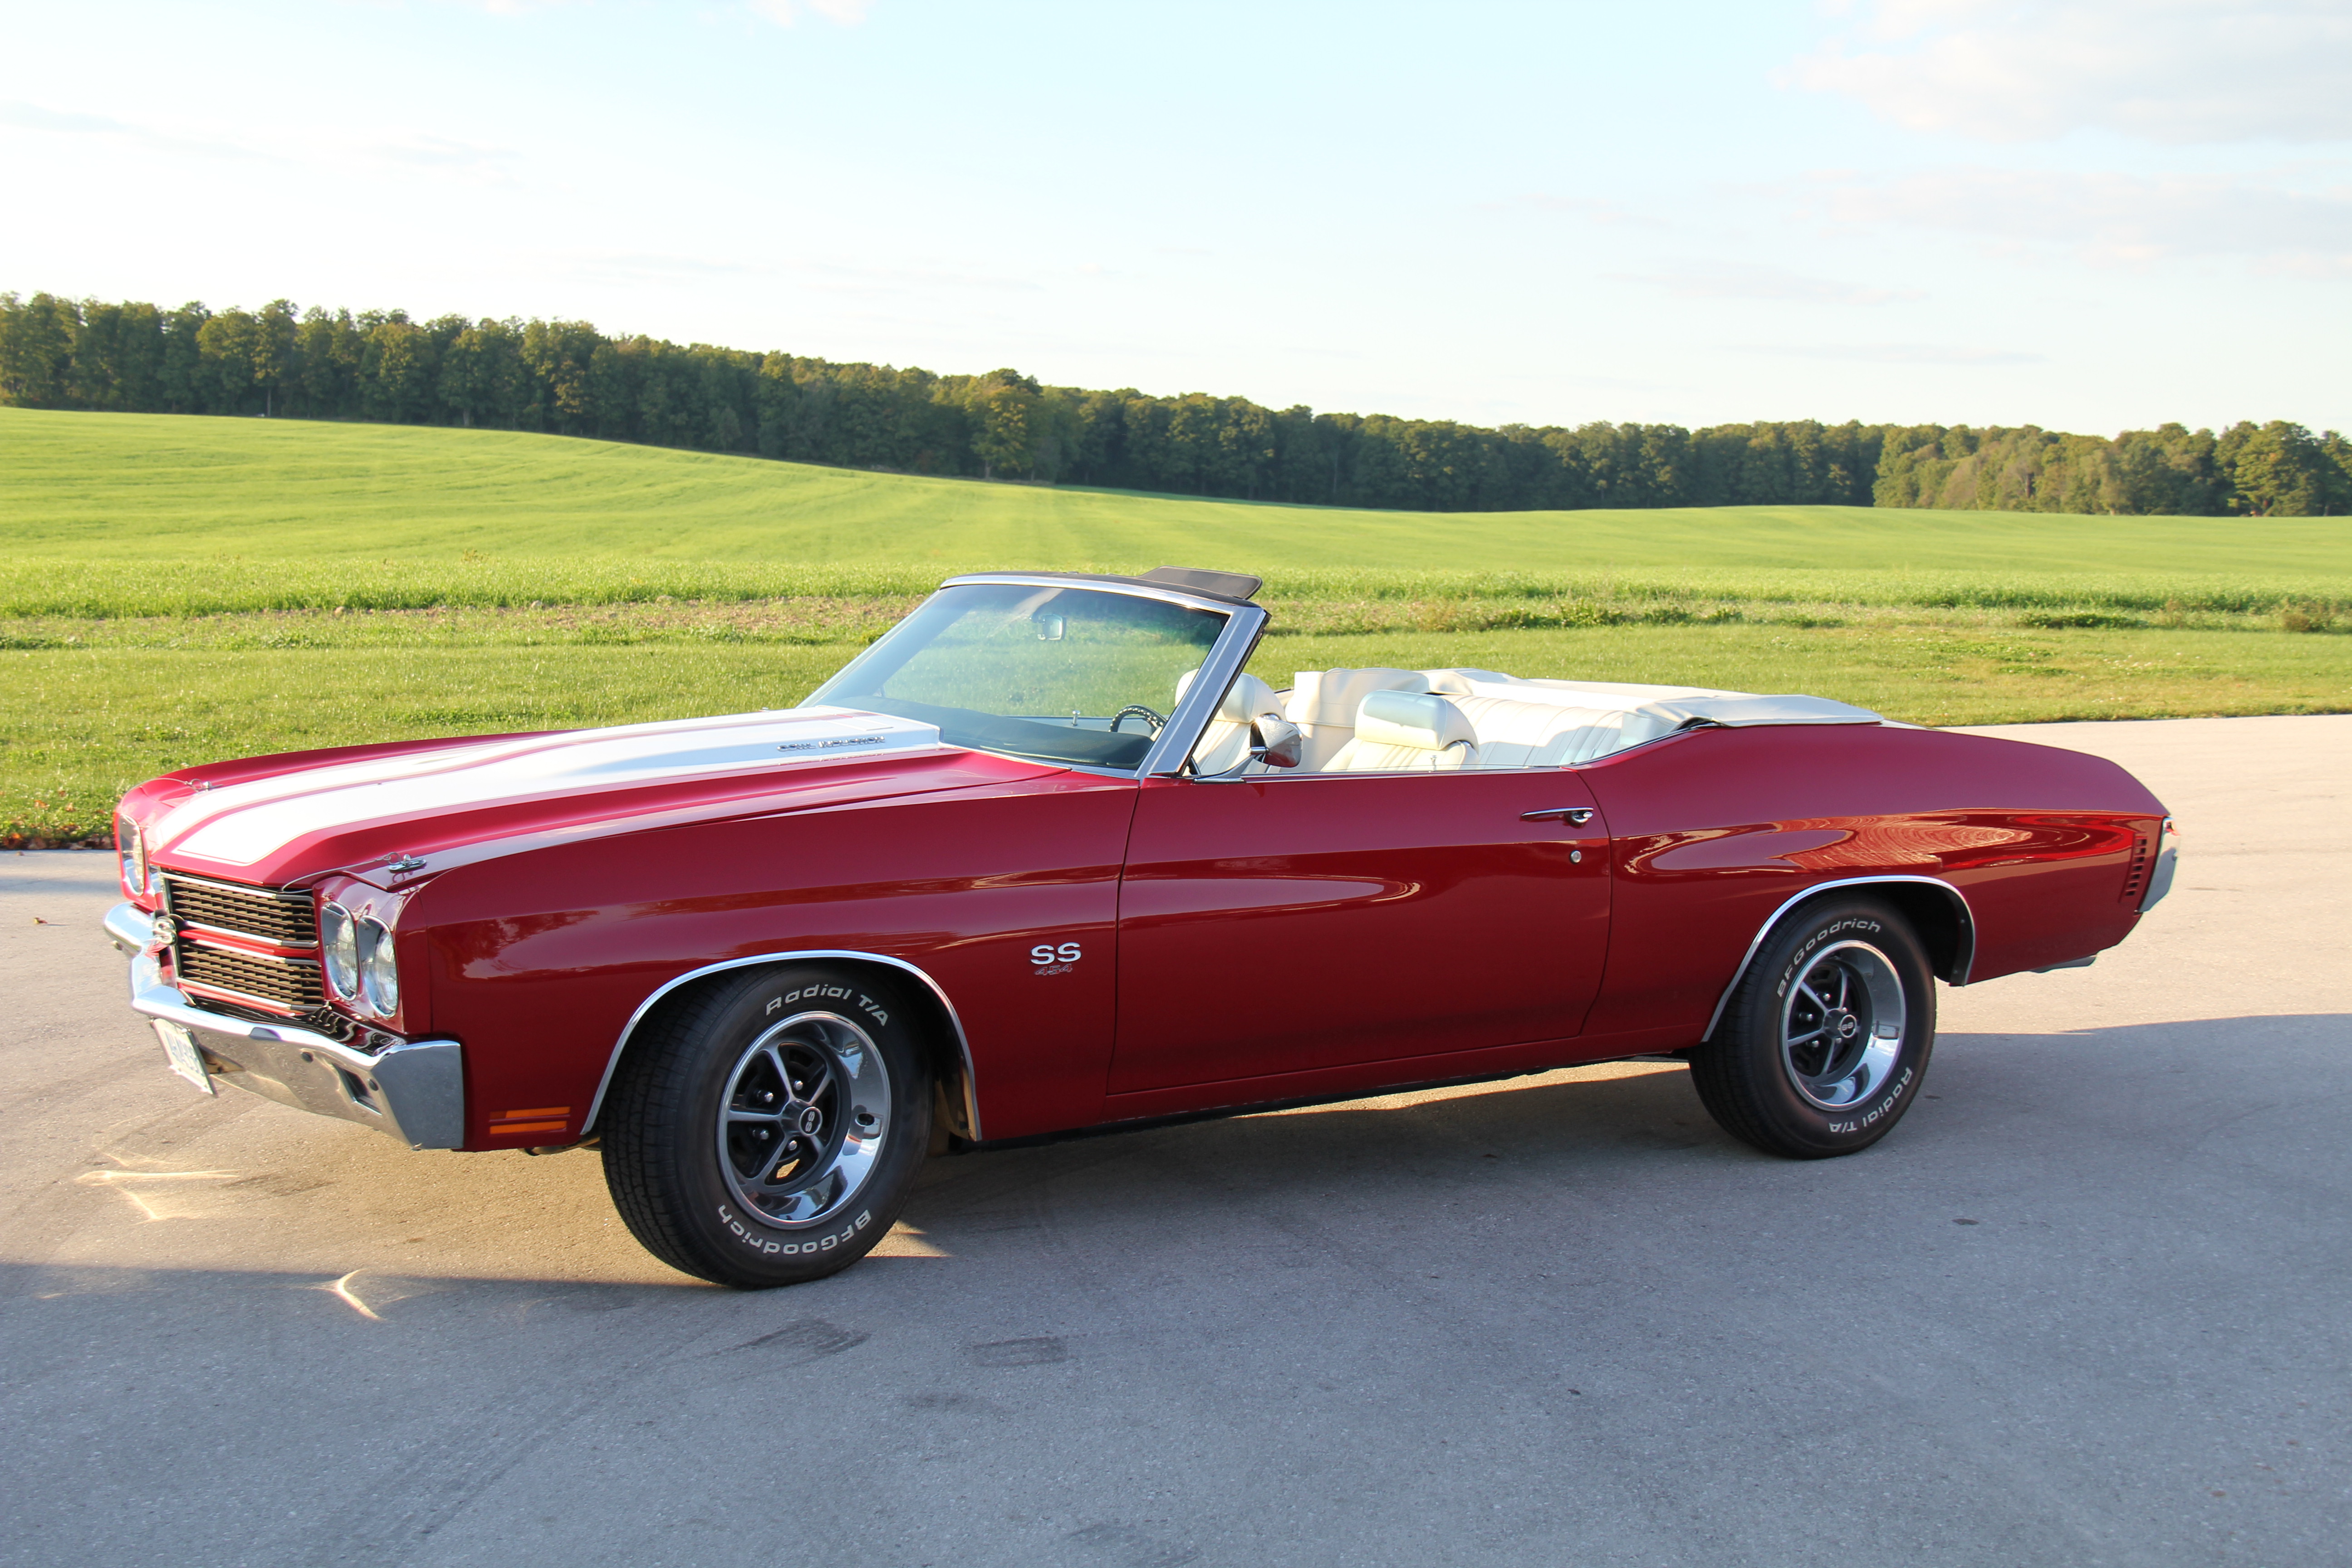 1970 CHEVELLE SS 396 CONVERTIBLE UPGRADE TO LS6